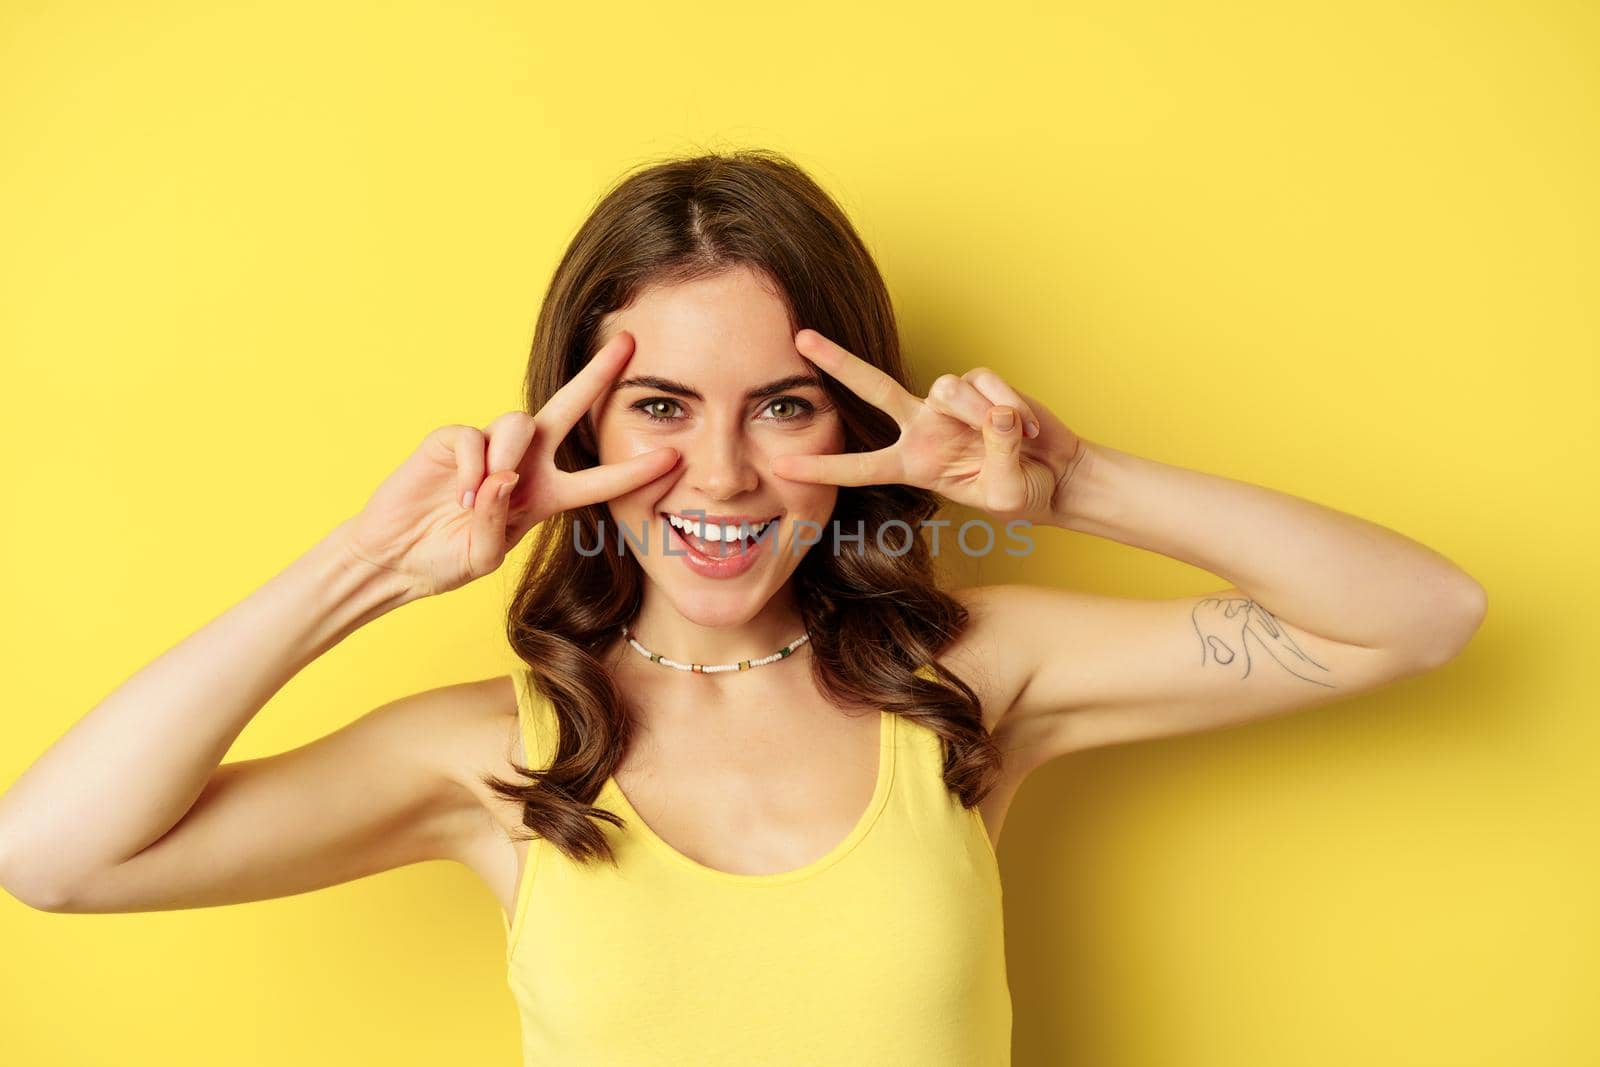 Close up portrait of smiling beautiful girl, showing peace v-sign and looking happy, posing for summer photo, standing against yellow background.